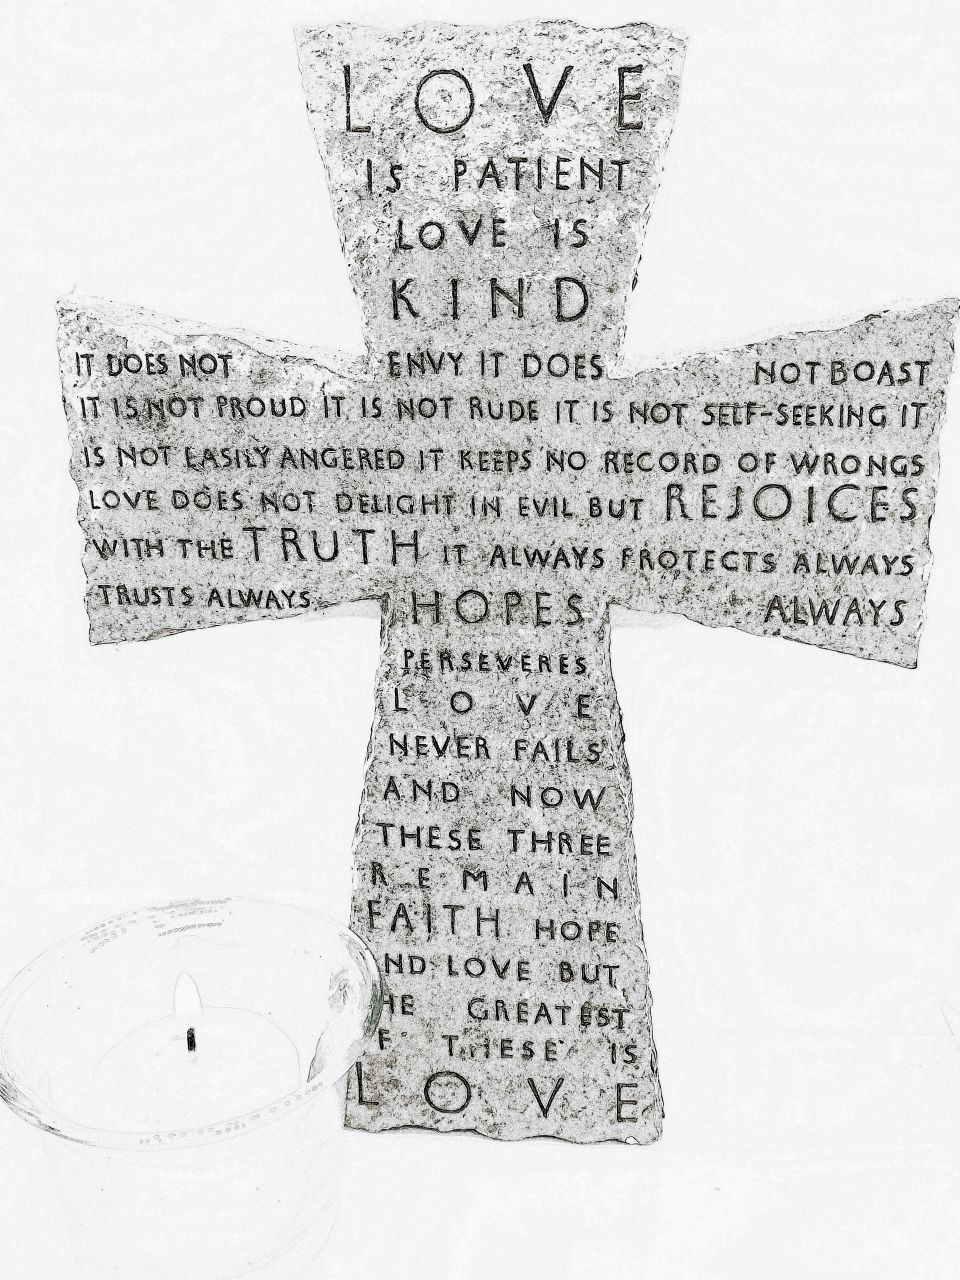 Crucifix with candle in the side, quotation is engraved in the cross about love